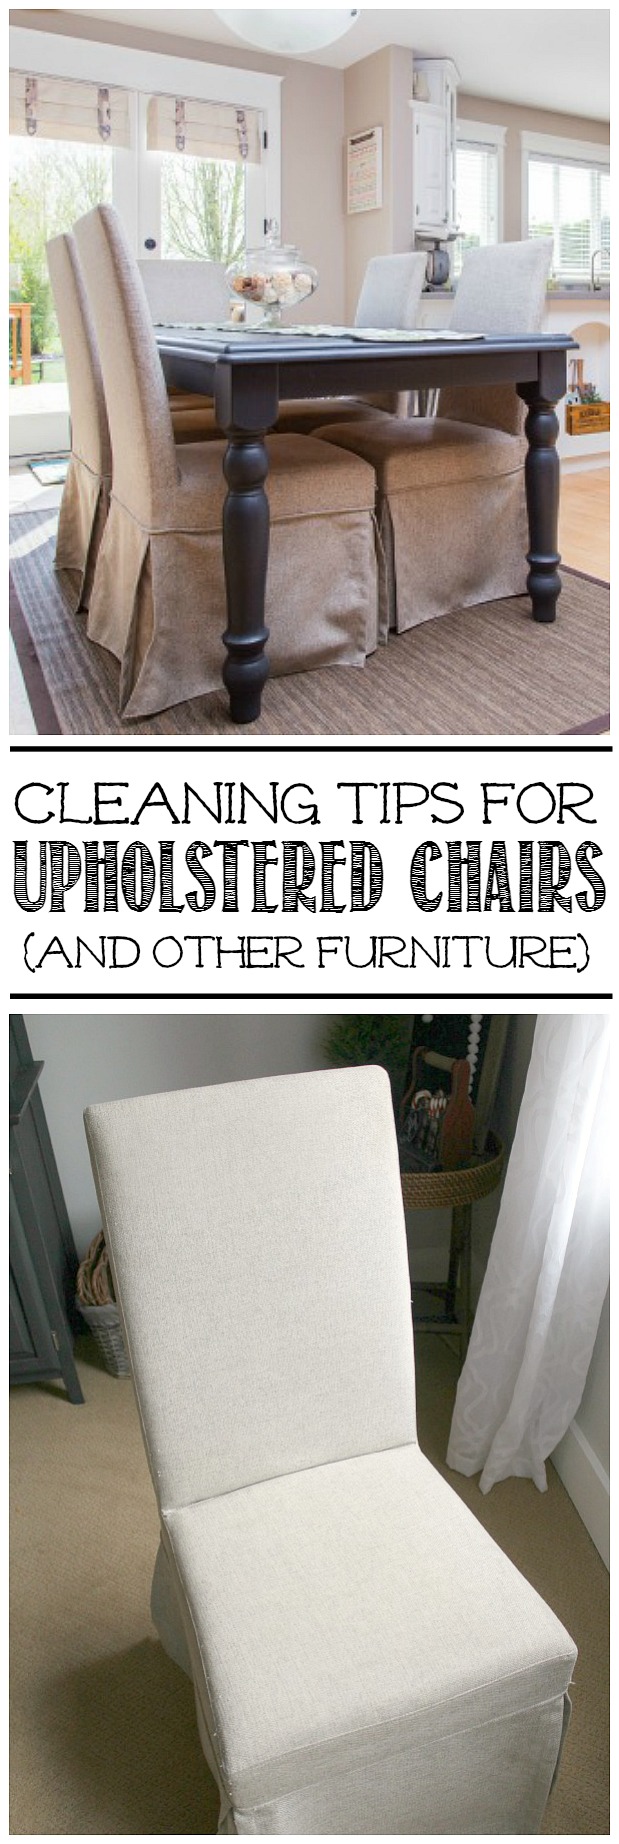 How To Clean Upholstered Chairs, Best Way To Clean Dining Room Chair Cushions